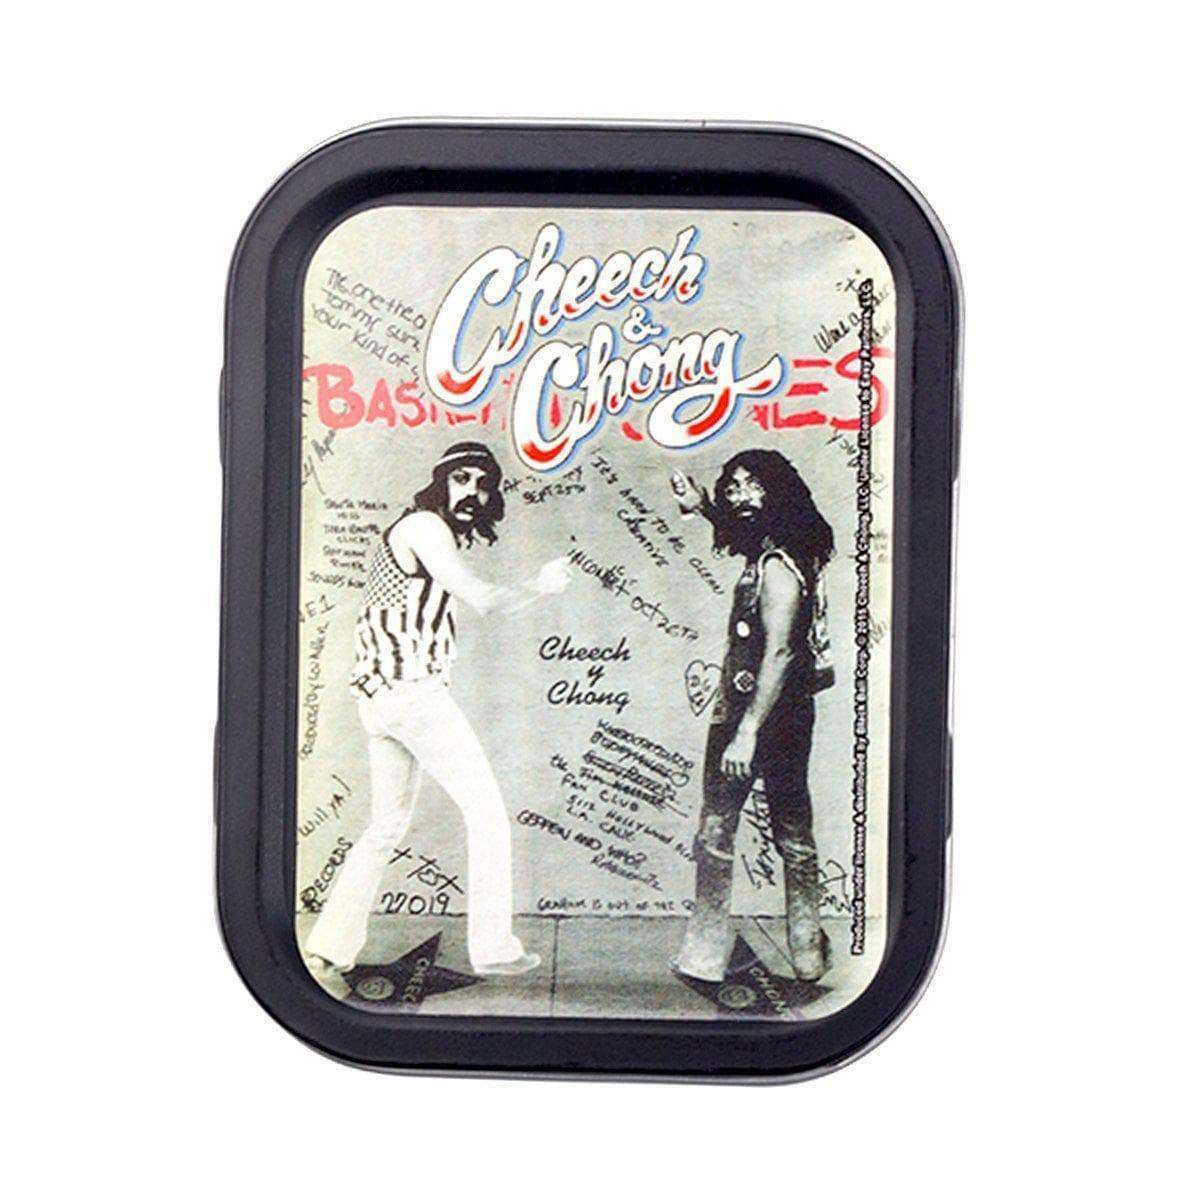 Quirky fun rectangular stashbox small tin container with funny comedy duo Cheech and Chong design on lid vintage look